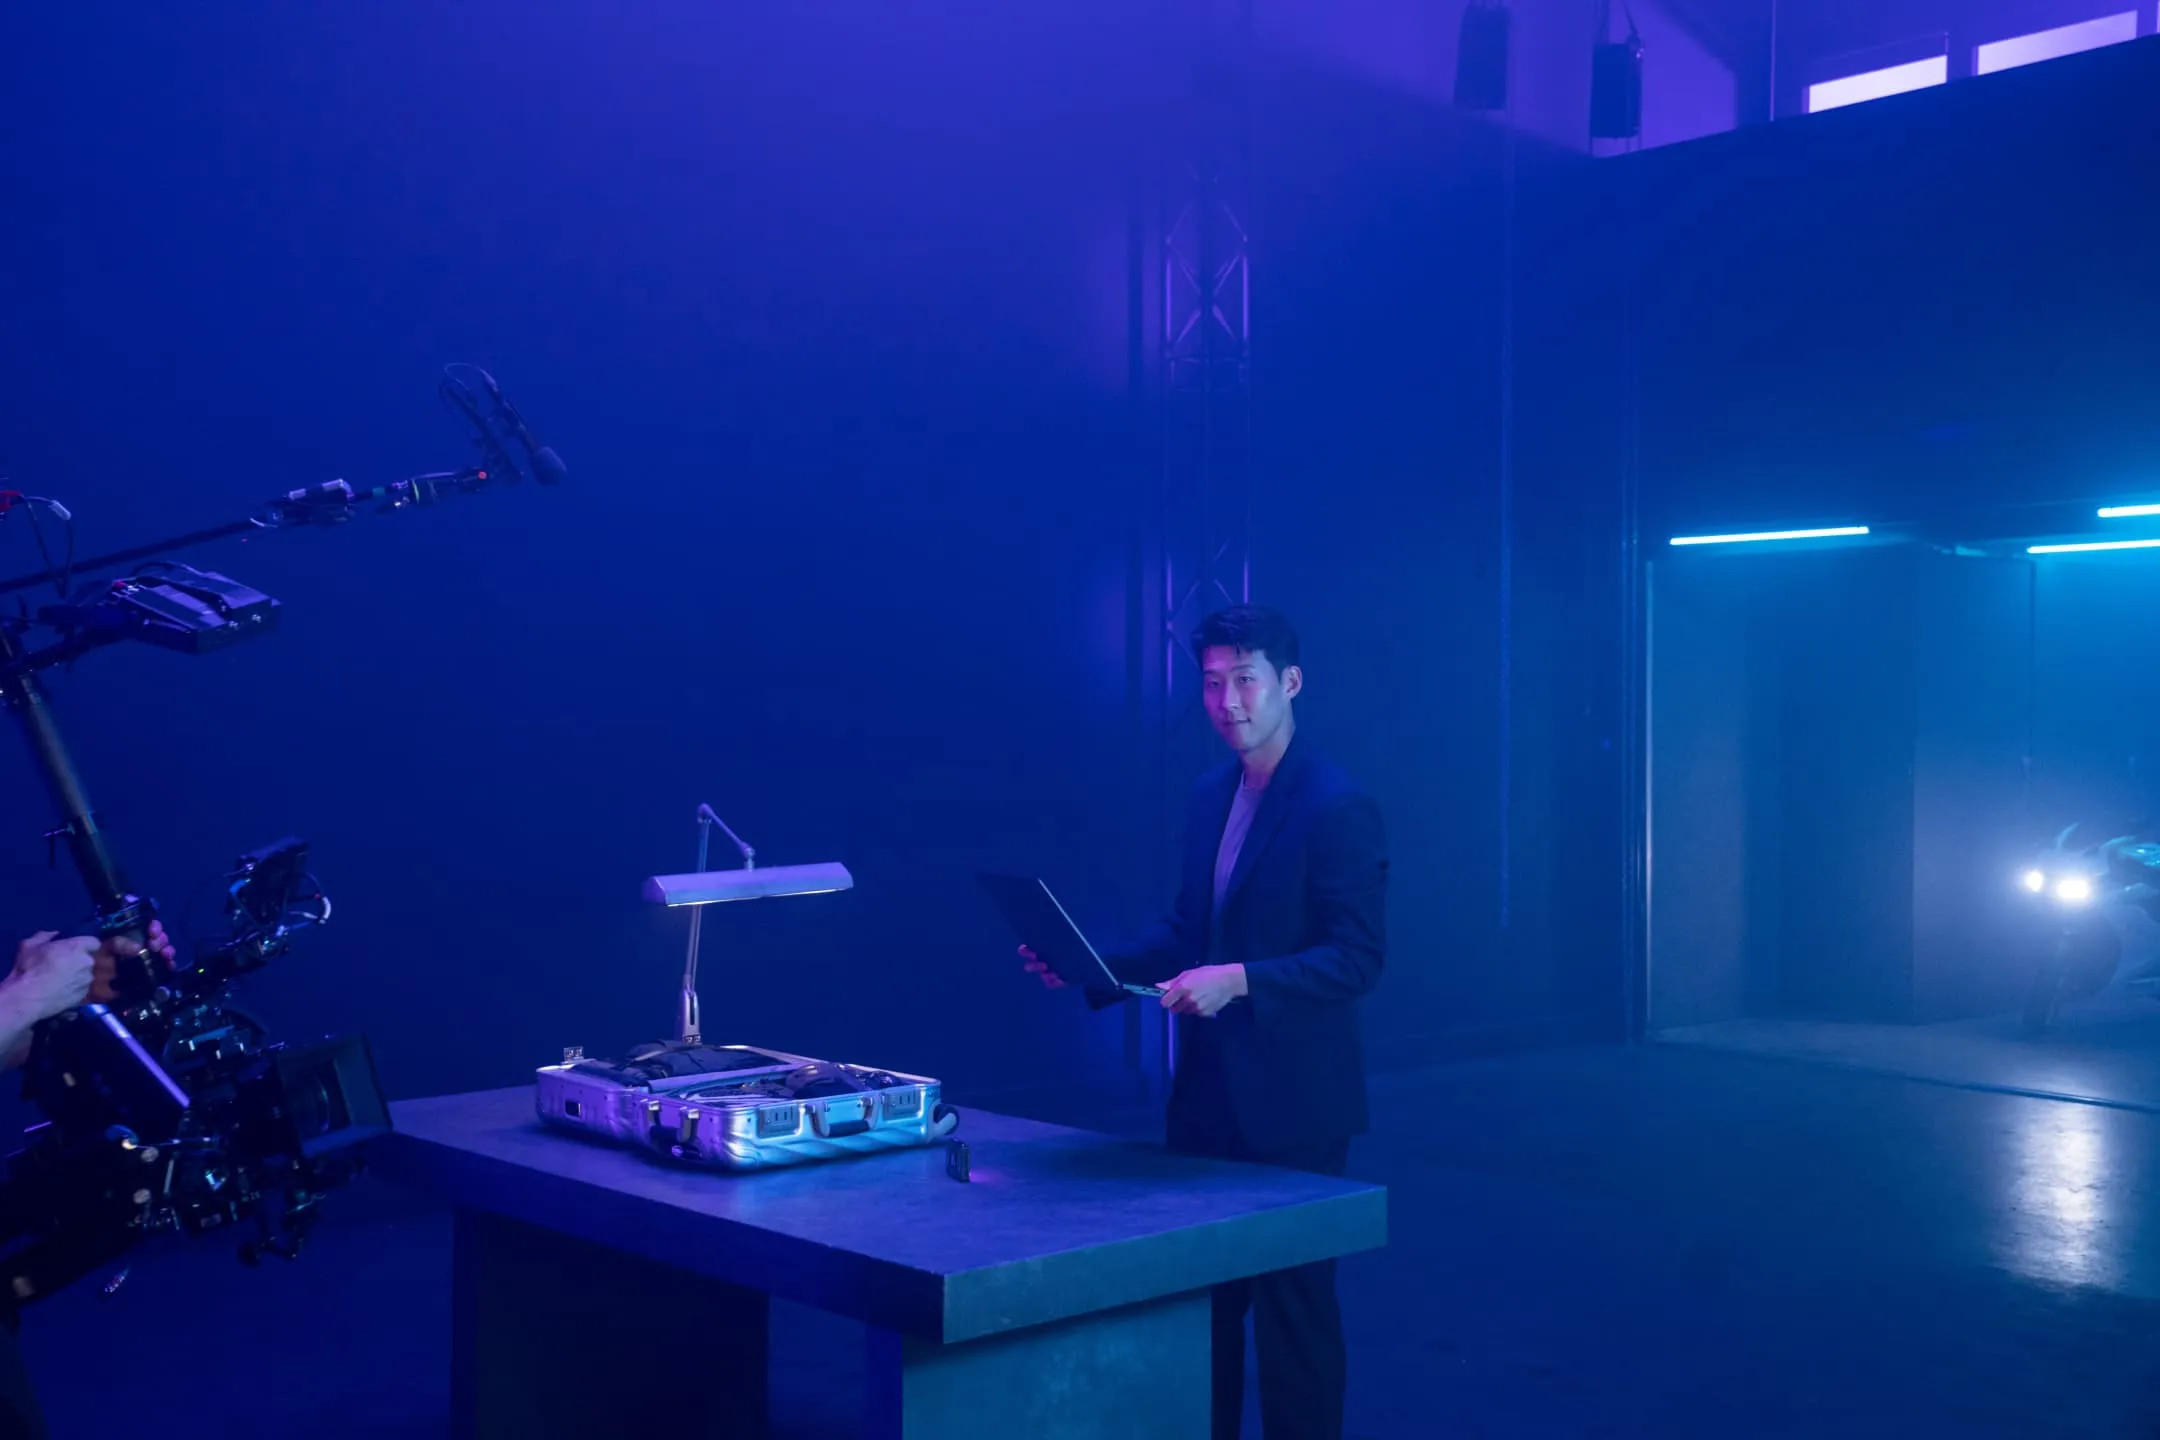 Son Heung-min on set, holding a Flow X16 laptop and standing in front of a table.